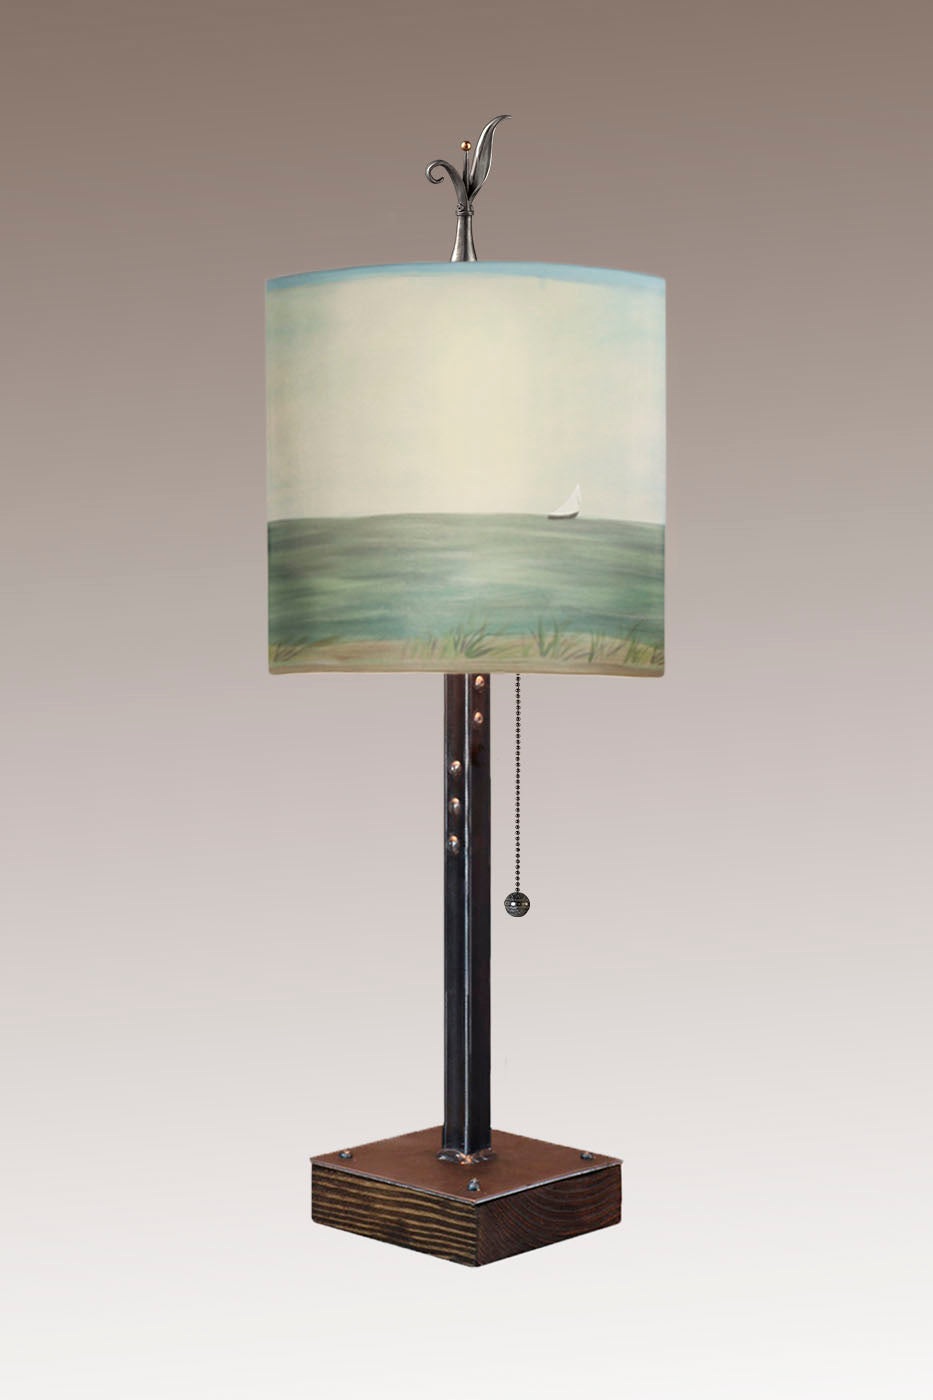 Janna Ugone & Co Table Lamps Steel Table Lamp on Wood with Medium Drum Shade in Shore